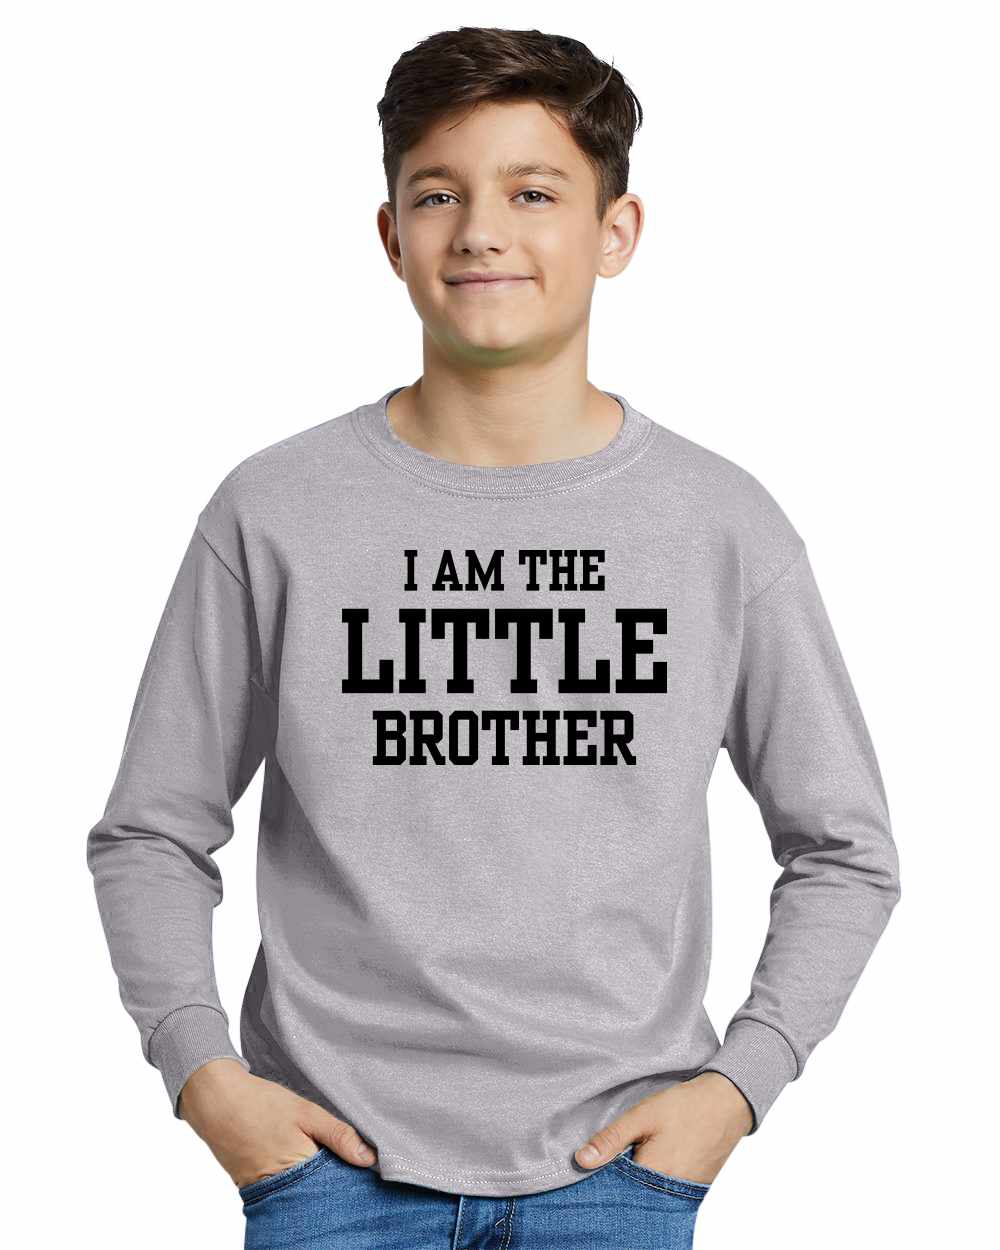 I AM The Little Brother on Youth Long Sleeve Shirt